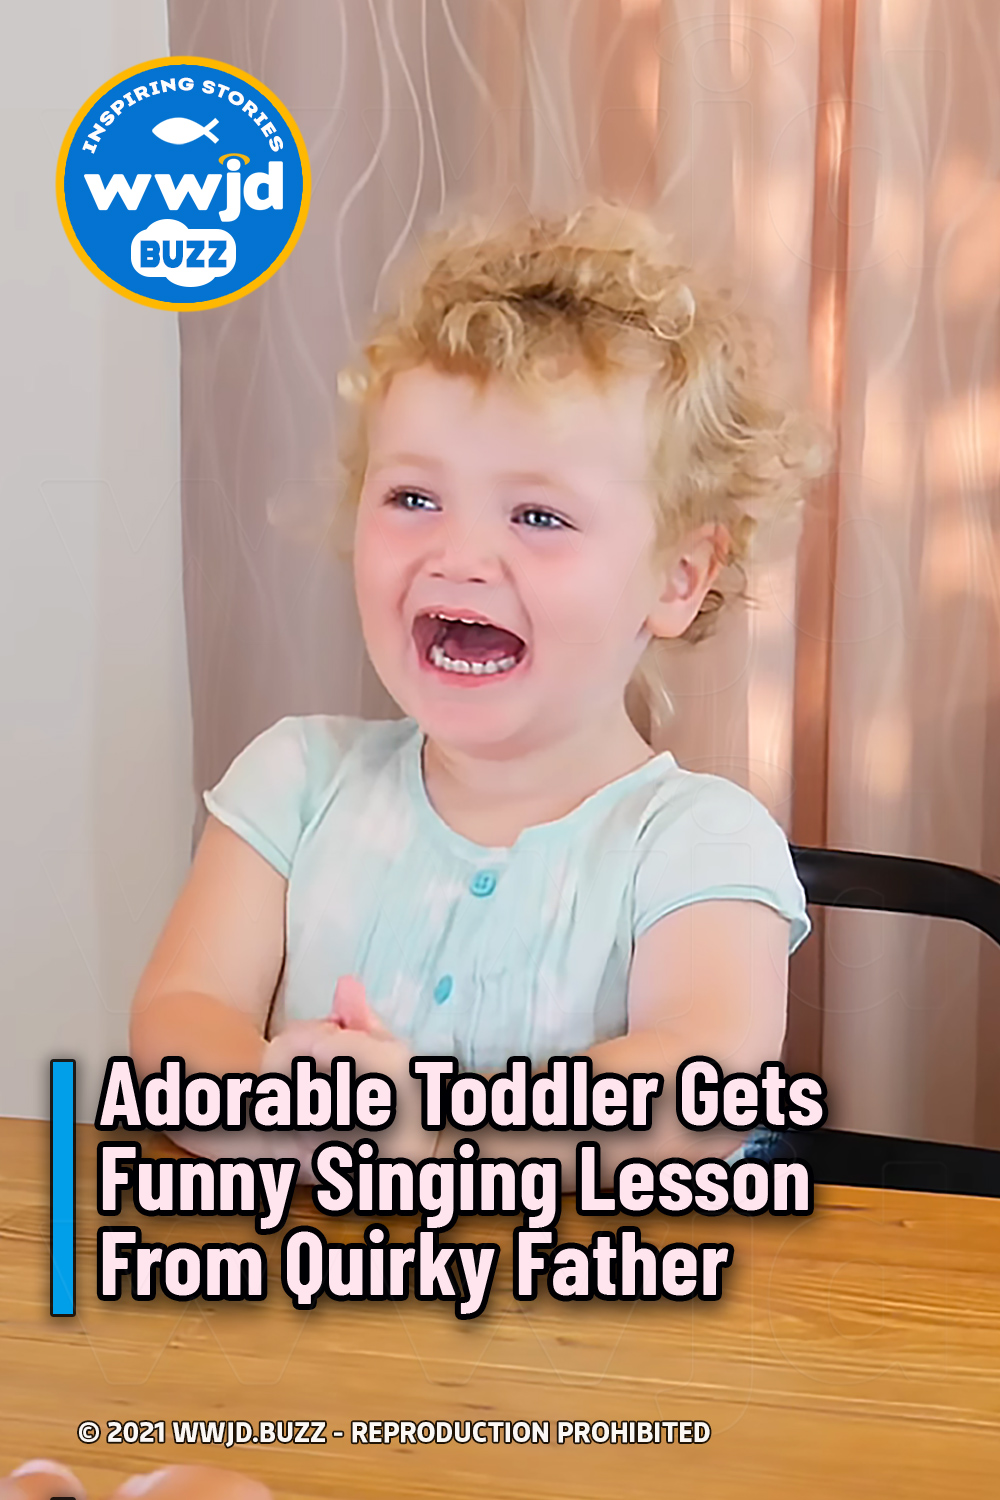 Adorable Toddler Gets Funny Singing Lesson From Quirky Father